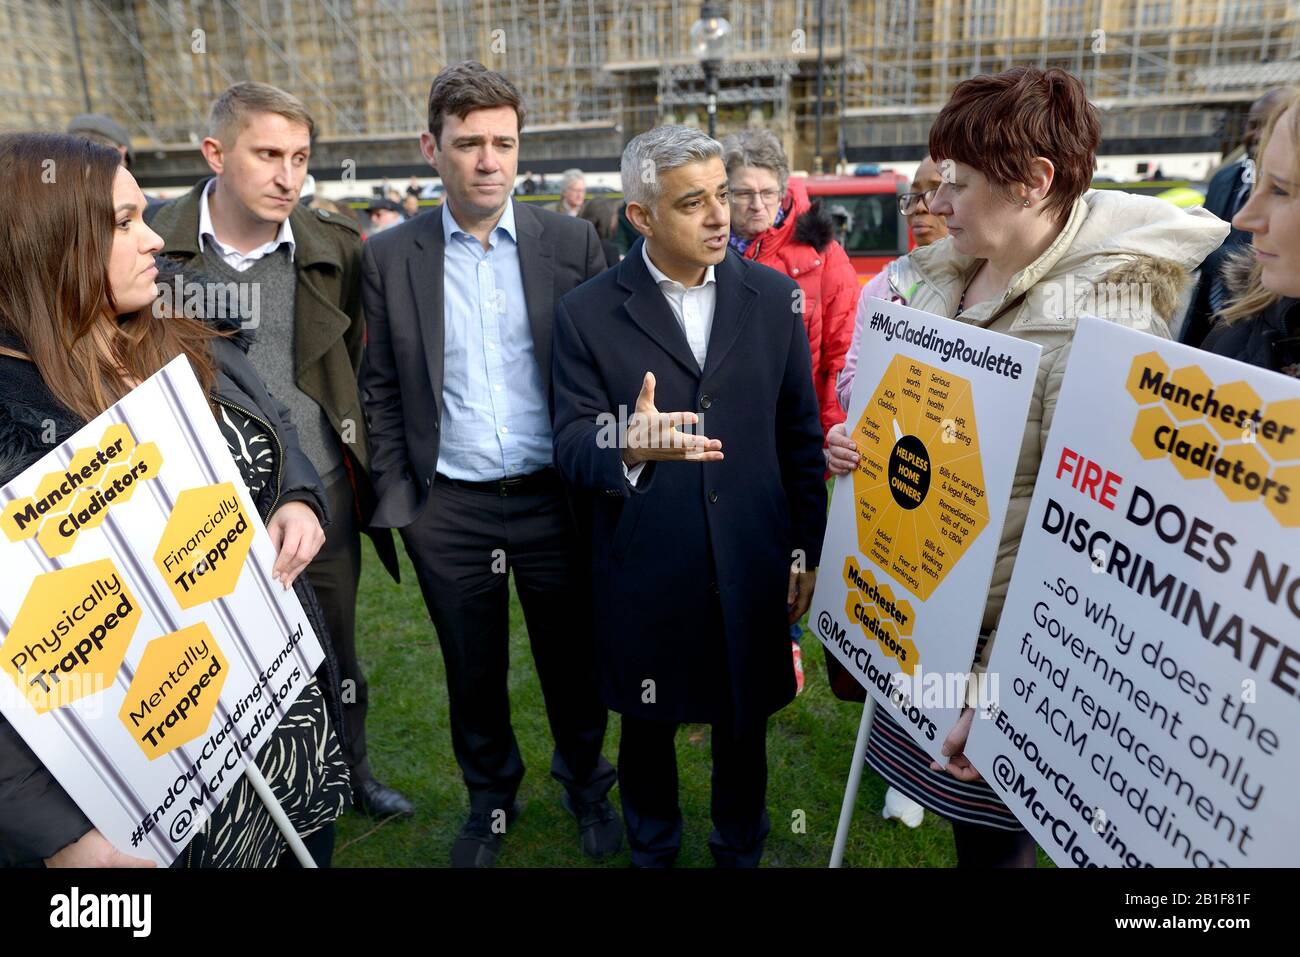 London, UK. 25th Feb, 2020. Mayor of Manchester Andy Burnham and Mayor of Salford Paul Dennett are joined by Sadiq Khan (Mayor of London) and Hilary Benn MP to lobby Government to take immediate action to support high rise residents living in unsafe buildings after the Grenfell Tower tragedy Credit: PjrFoto/Alamy Live News Stock Photo